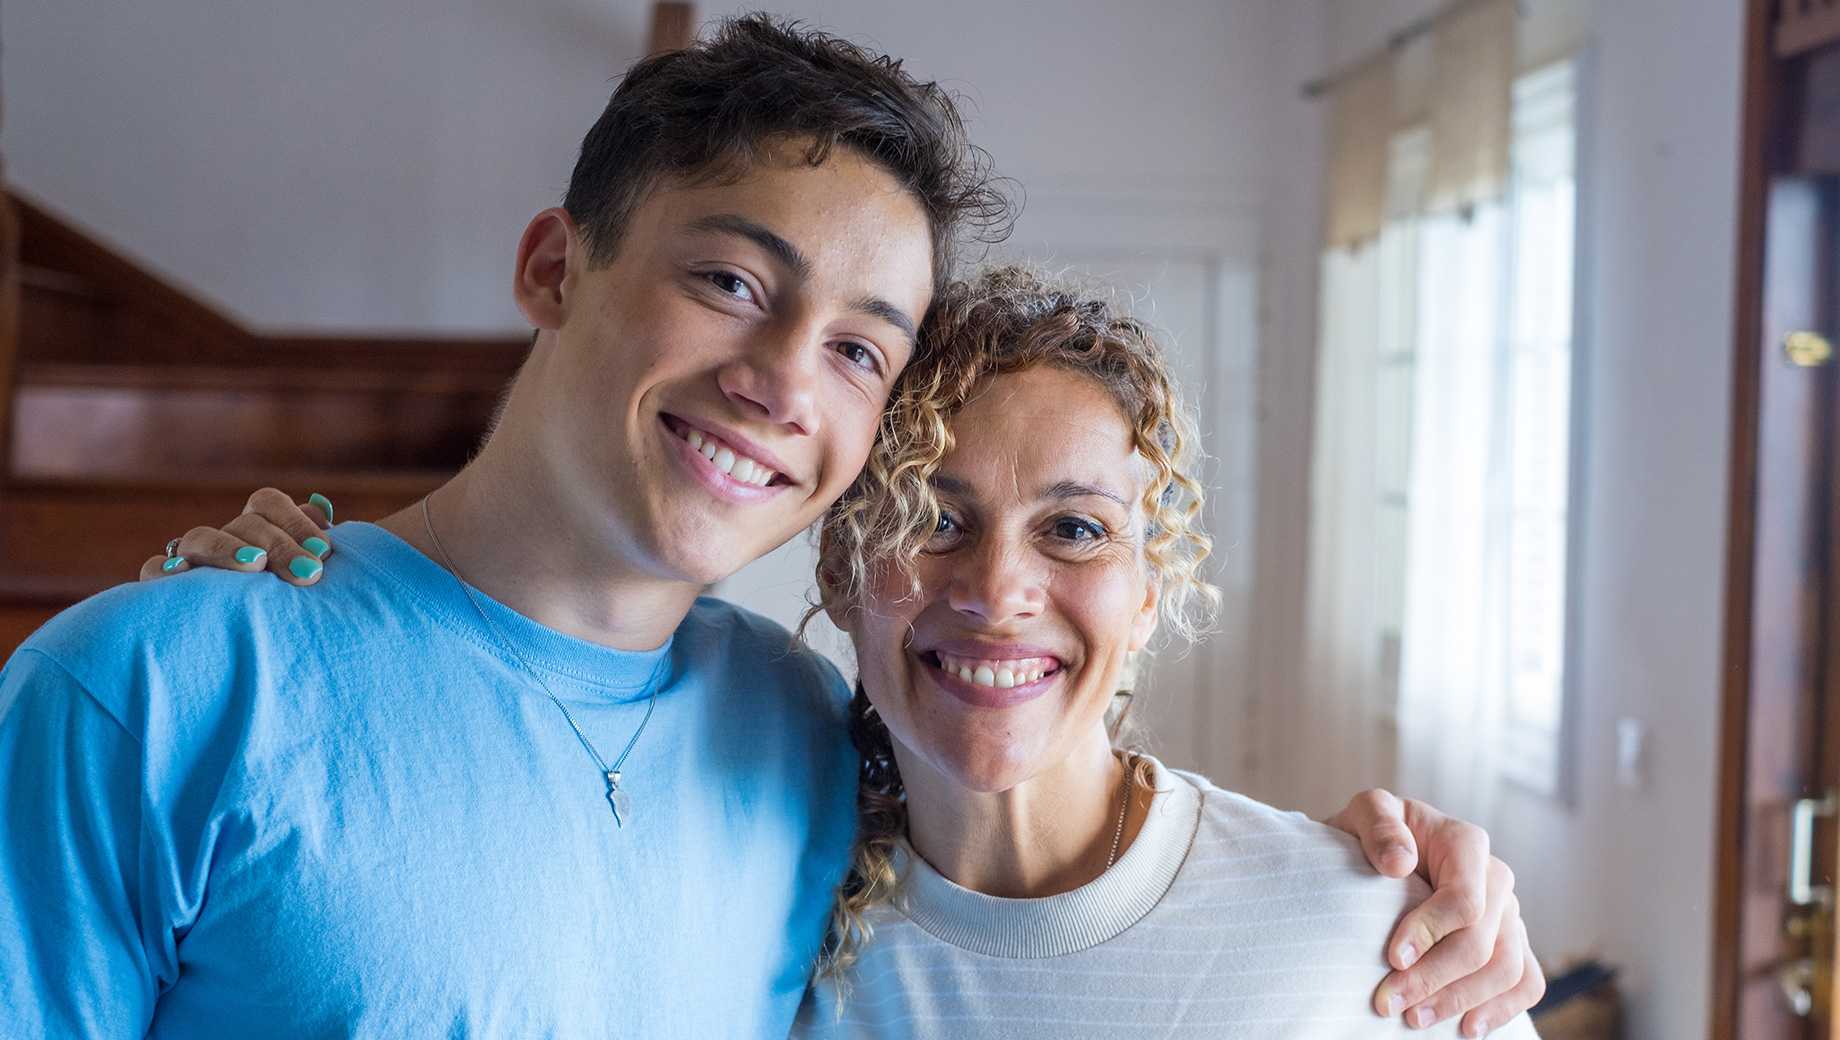 Smiling mother and son